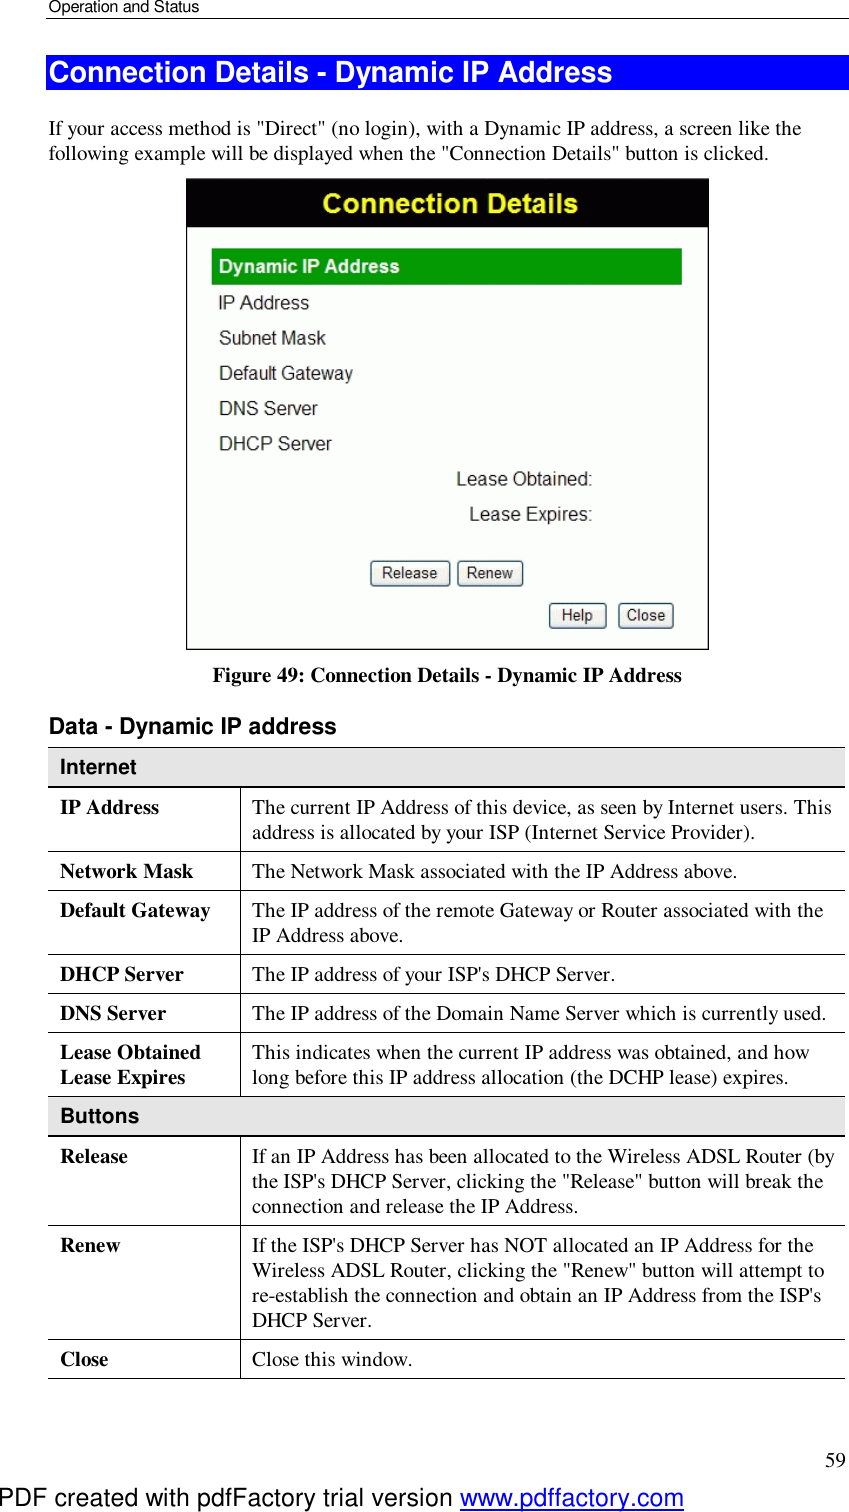 Operation and Status 59 Connection Details - Dynamic IP Address If your access method is &quot;Direct&quot; (no login), with a Dynamic IP address, a screen like the following example will be displayed when the &quot;Connection Details&quot; button is clicked.  Figure 49: Connection Details - Dynamic IP Address Data - Dynamic IP address Internet IP Address  The current IP Address of this device, as seen by Internet users. This address is allocated by your ISP (Internet Service Provider). Network Mask  The Network Mask associated with the IP Address above. Default Gateway  The IP address of the remote Gateway or Router associated with the IP Address above. DHCP Server  The IP address of your ISP&apos;s DHCP Server. DNS Server  The IP address of the Domain Name Server which is currently used. Lease Obtained Lease Expires  This indicates when the current IP address was obtained, and how long before this IP address allocation (the DCHP lease) expires. Buttons Release  If an IP Address has been allocated to the Wireless ADSL Router (by the ISP&apos;s DHCP Server, clicking the &quot;Release&quot; button will break the connection and release the IP Address. Renew  If the ISP&apos;s DHCP Server has NOT allocated an IP Address for the Wireless ADSL Router, clicking the &quot;Renew&quot; button will attempt to re-establish the connection and obtain an IP Address from the ISP&apos;s DHCP Server. Close  Close this window.  PDF created with pdfFactory trial version www.pdffactory.com